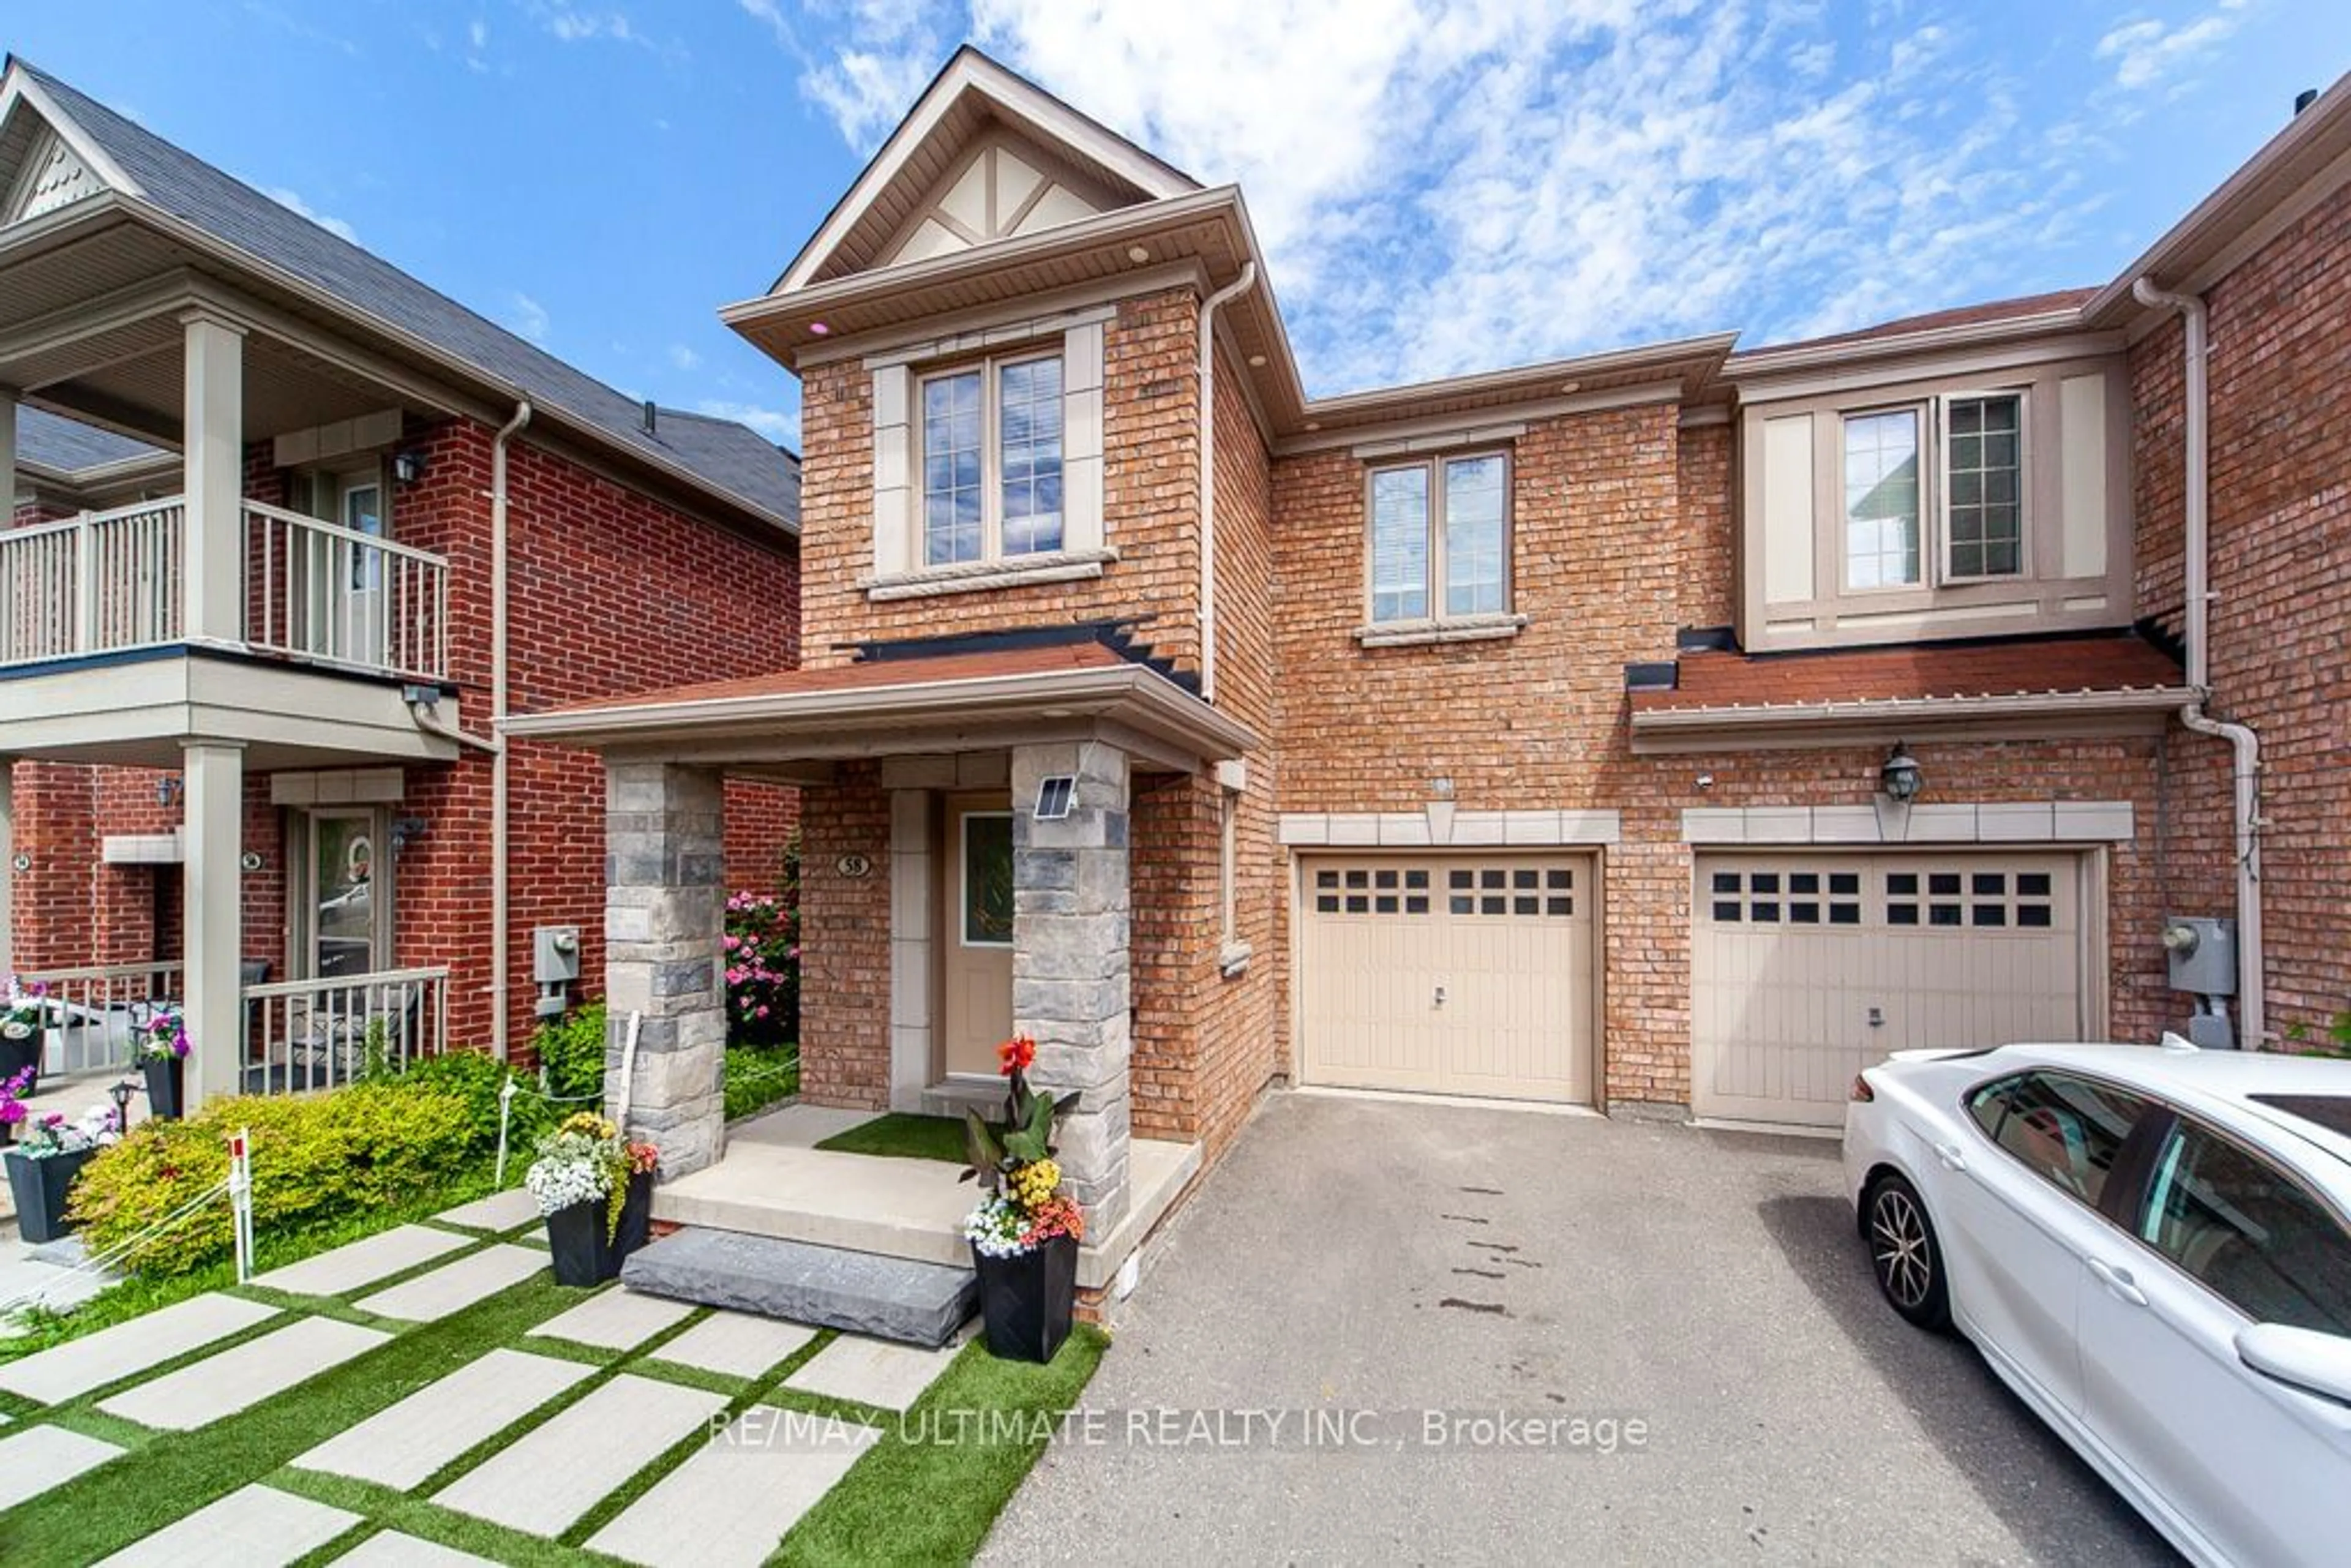 Home with brick exterior material for 58 Coranto Way, Vaughan Ontario L4H 3P6